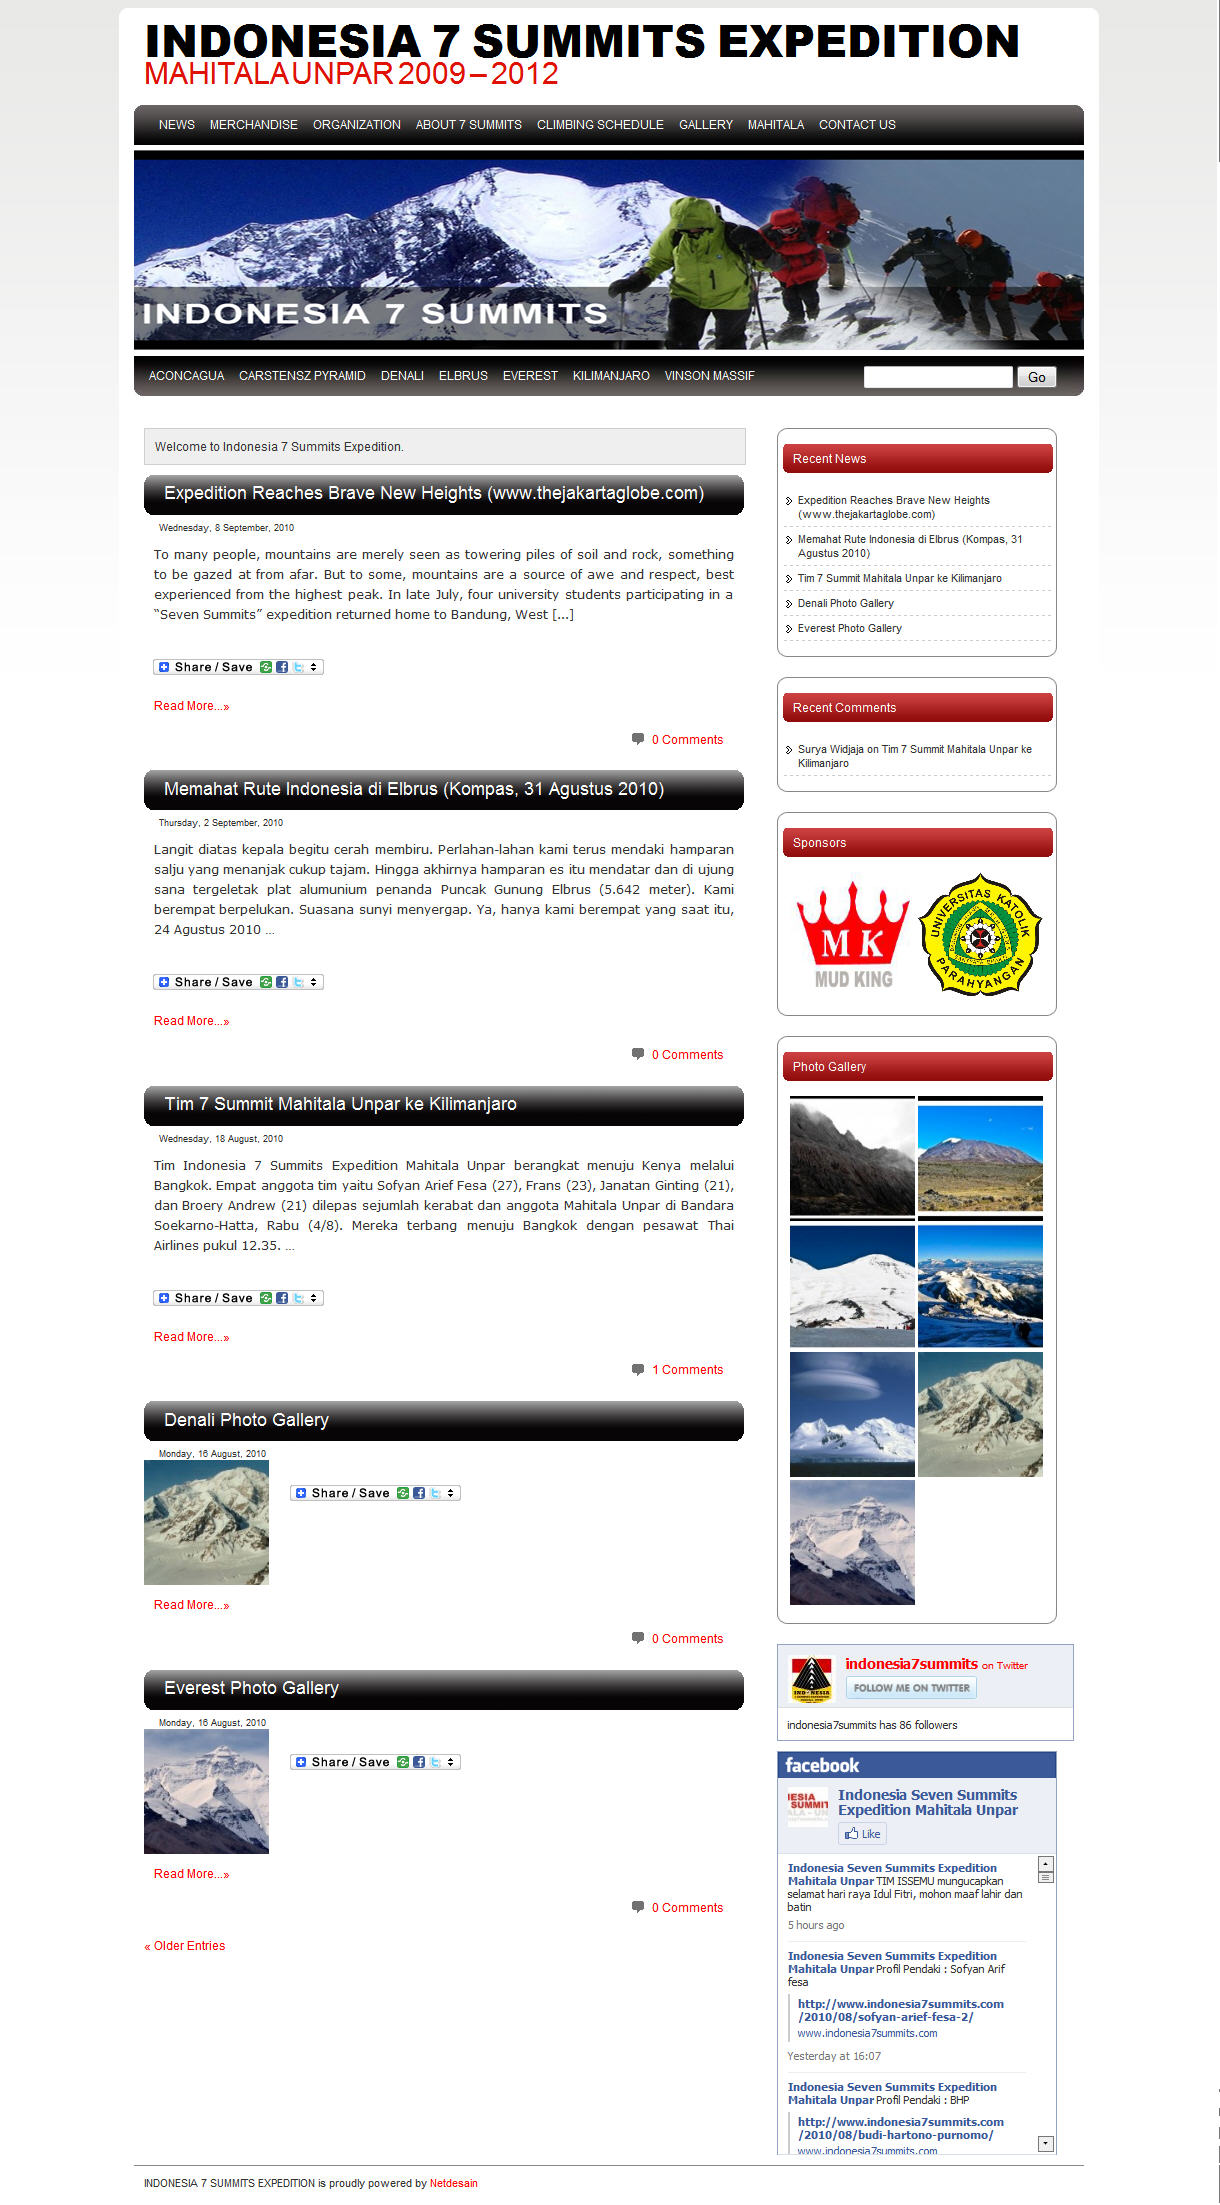 Website “Indonesia 7 Summits Expedition” Launch